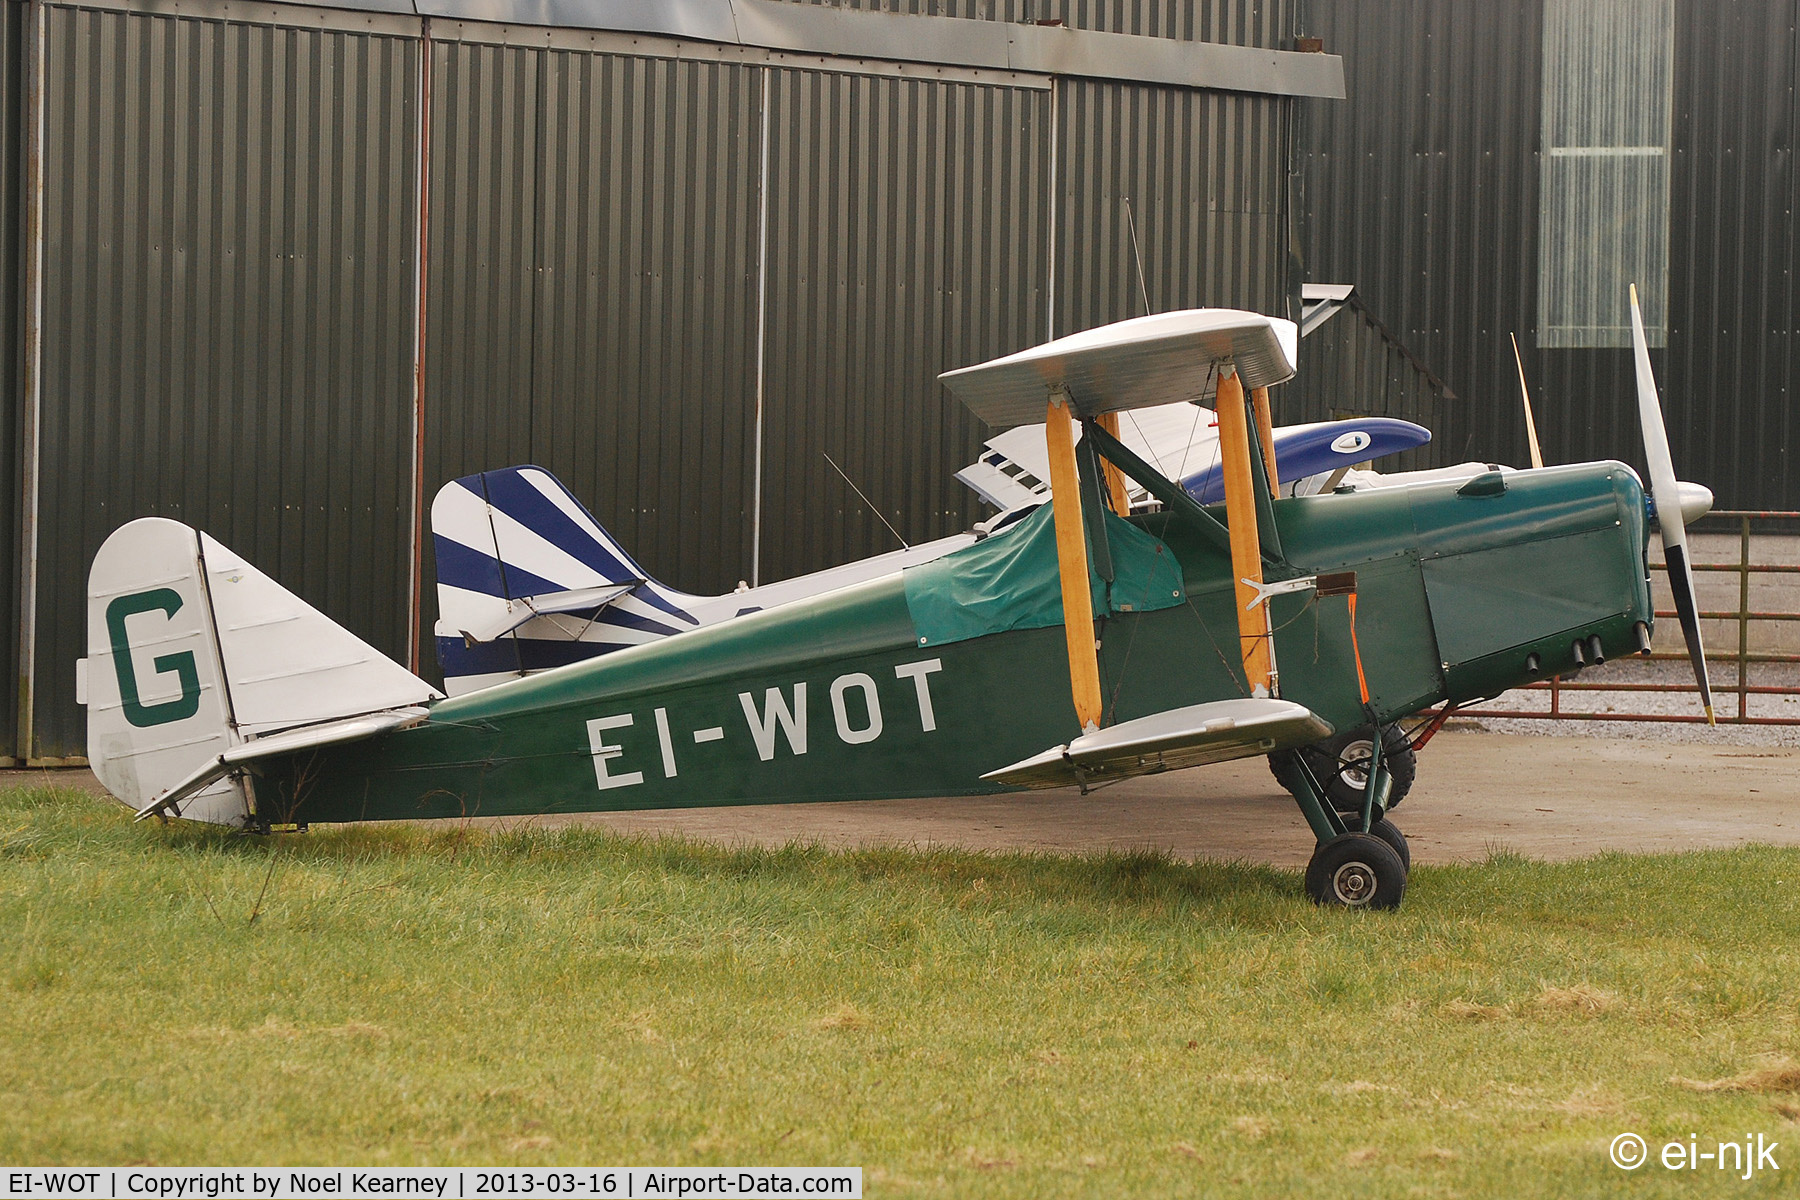 EI-WOT, 1987 Currie Wot C/N PFA 3019, Photographed at the Limetree Spring Fly-in 16-03-2013.